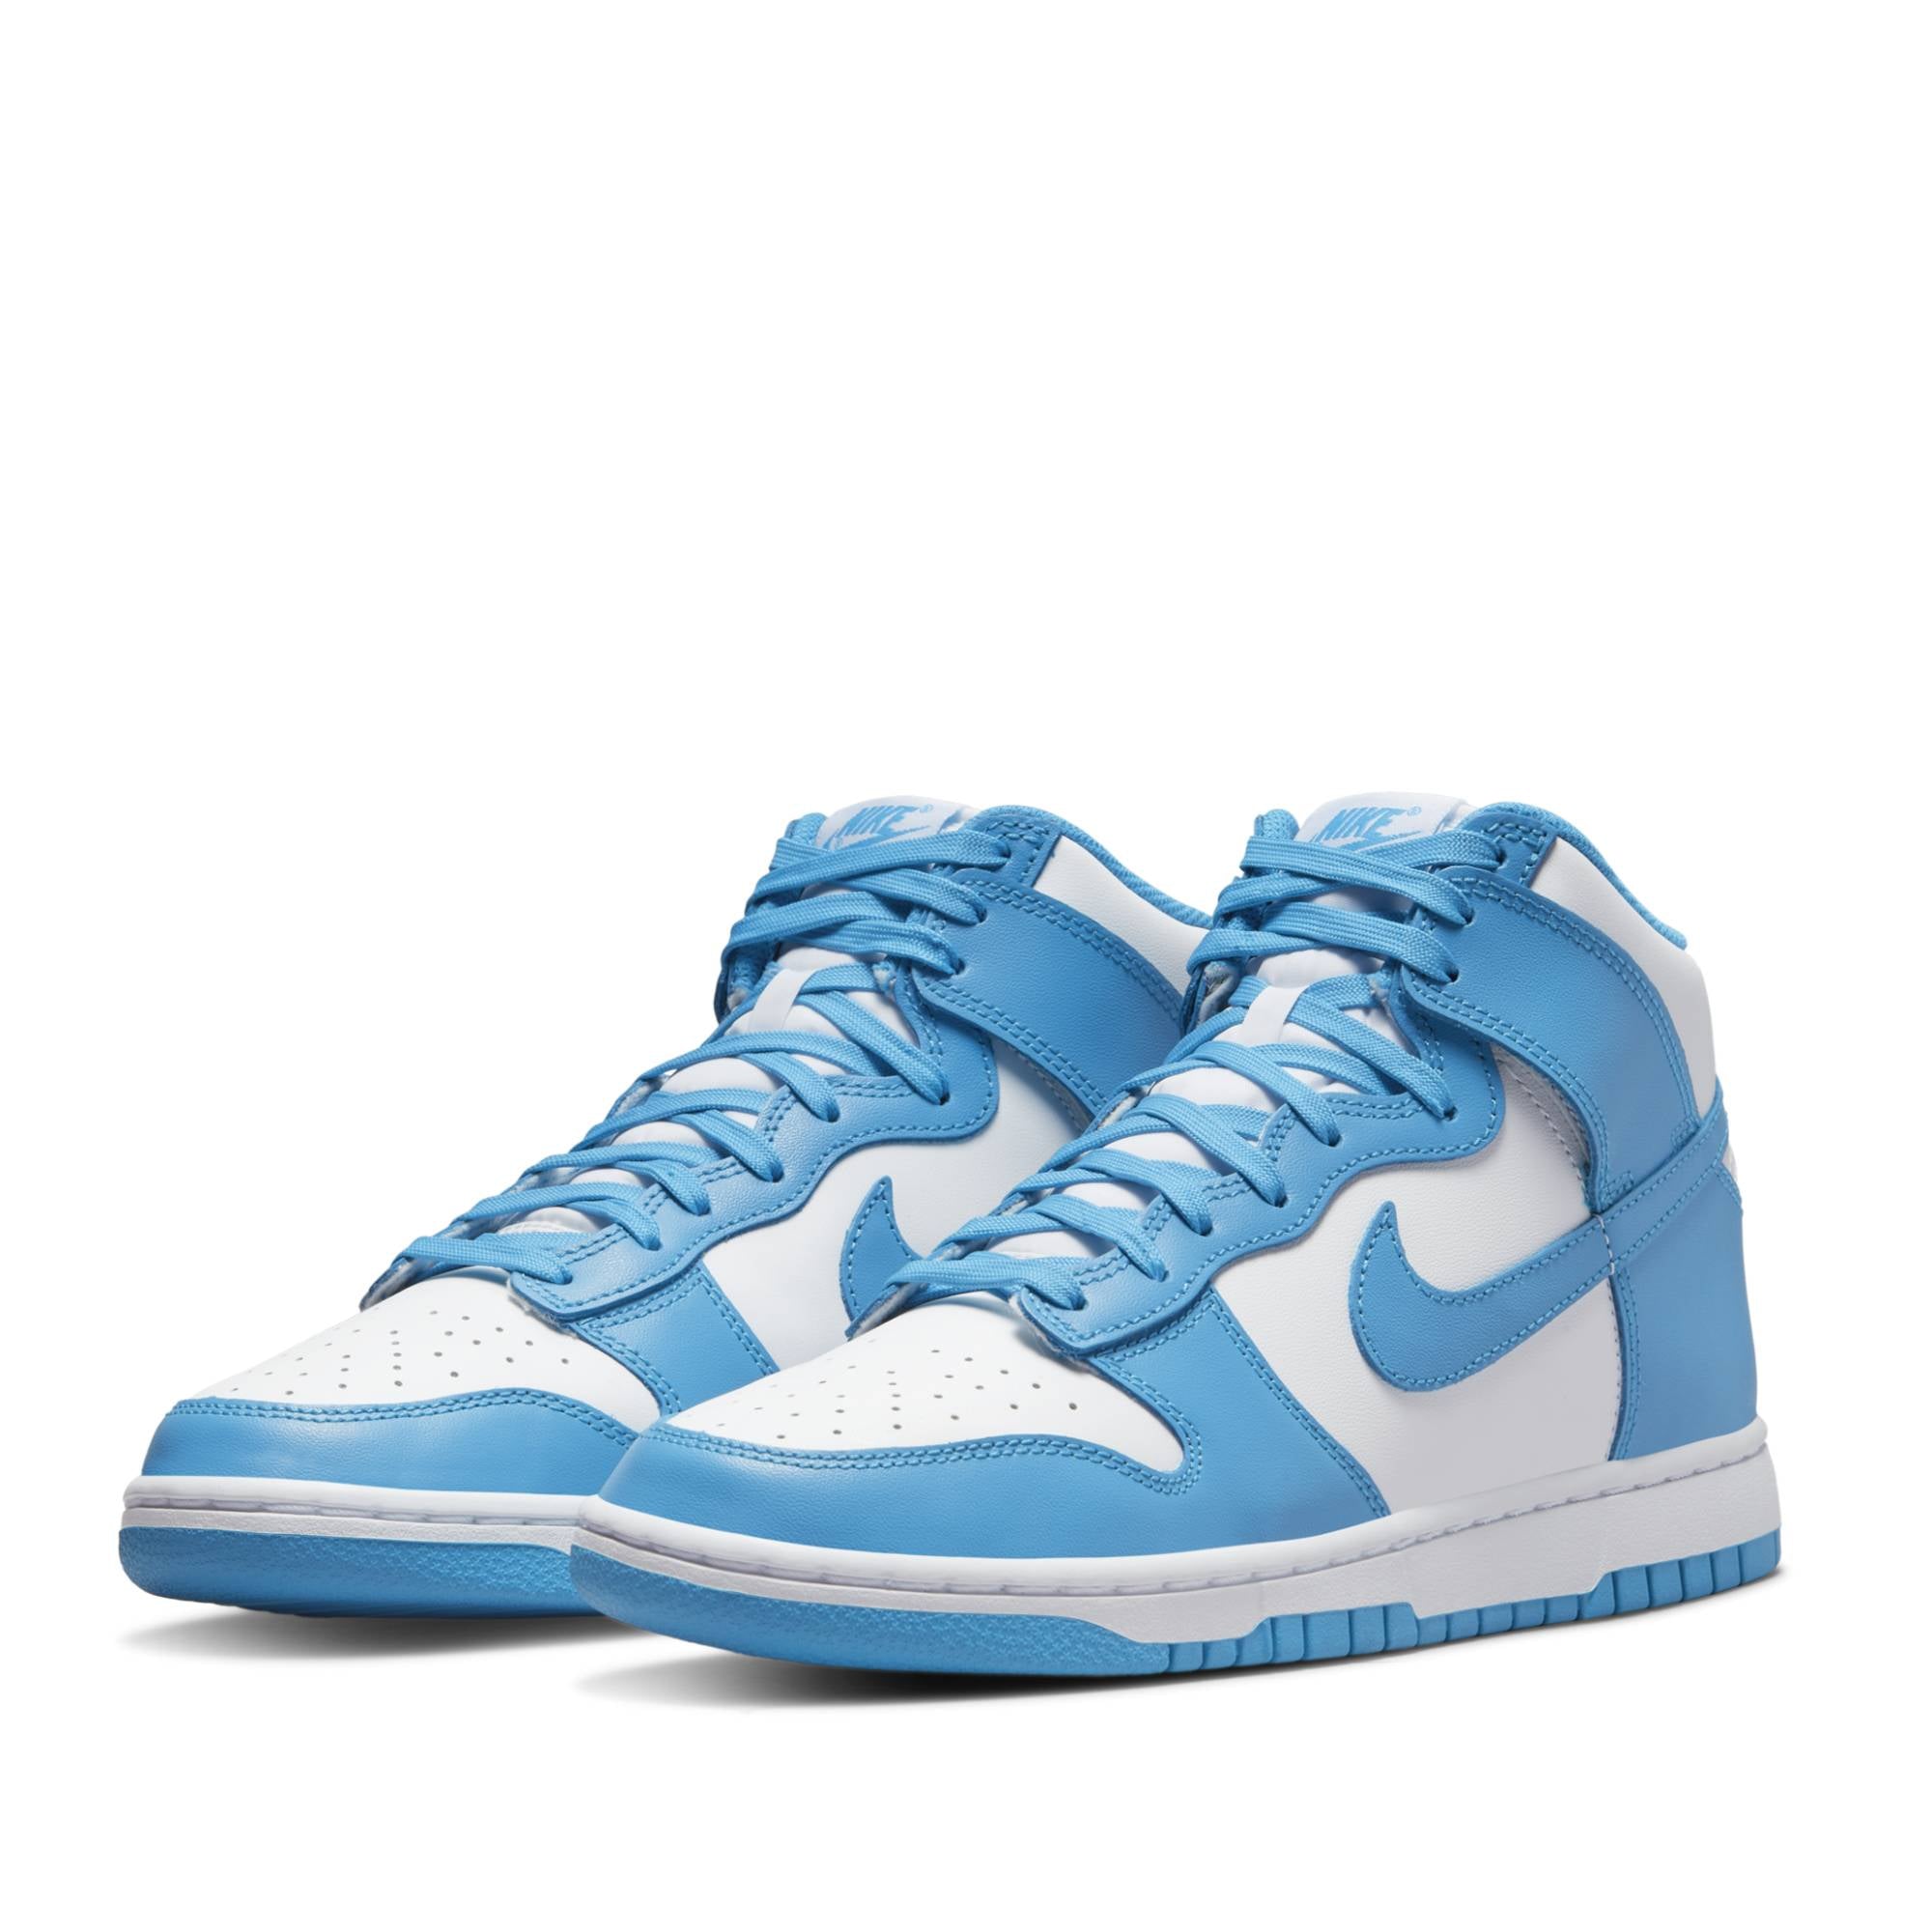 Nike Dunk High ’Laser Blue’ M Us 7 / W 8.5 Sneakers